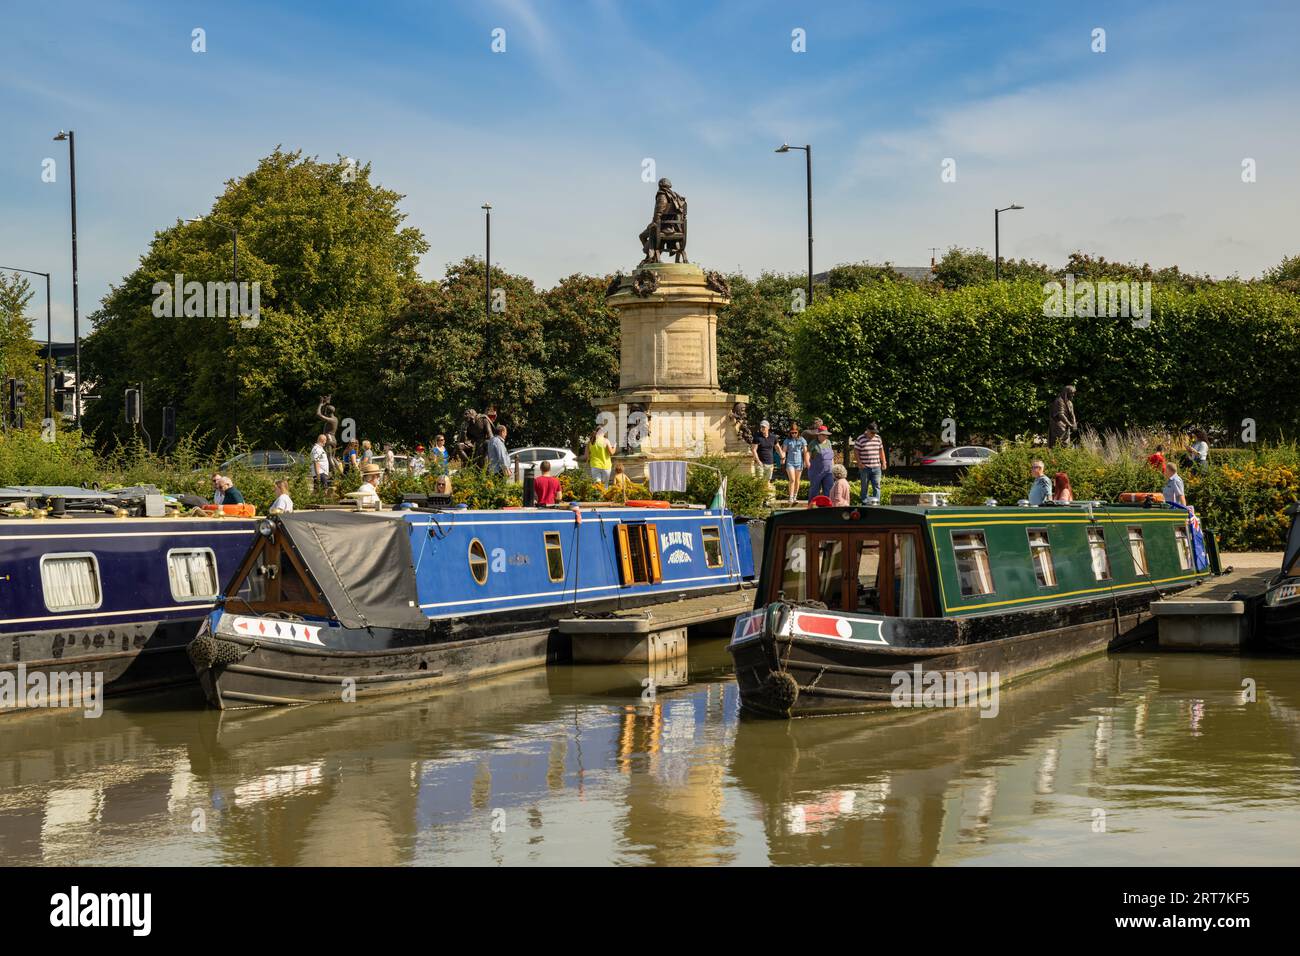 Canal boats in Bancroft Basin with the Shakespeare Memorial in the background, Stratford on Avon,Warwickshire, England Stock Photo